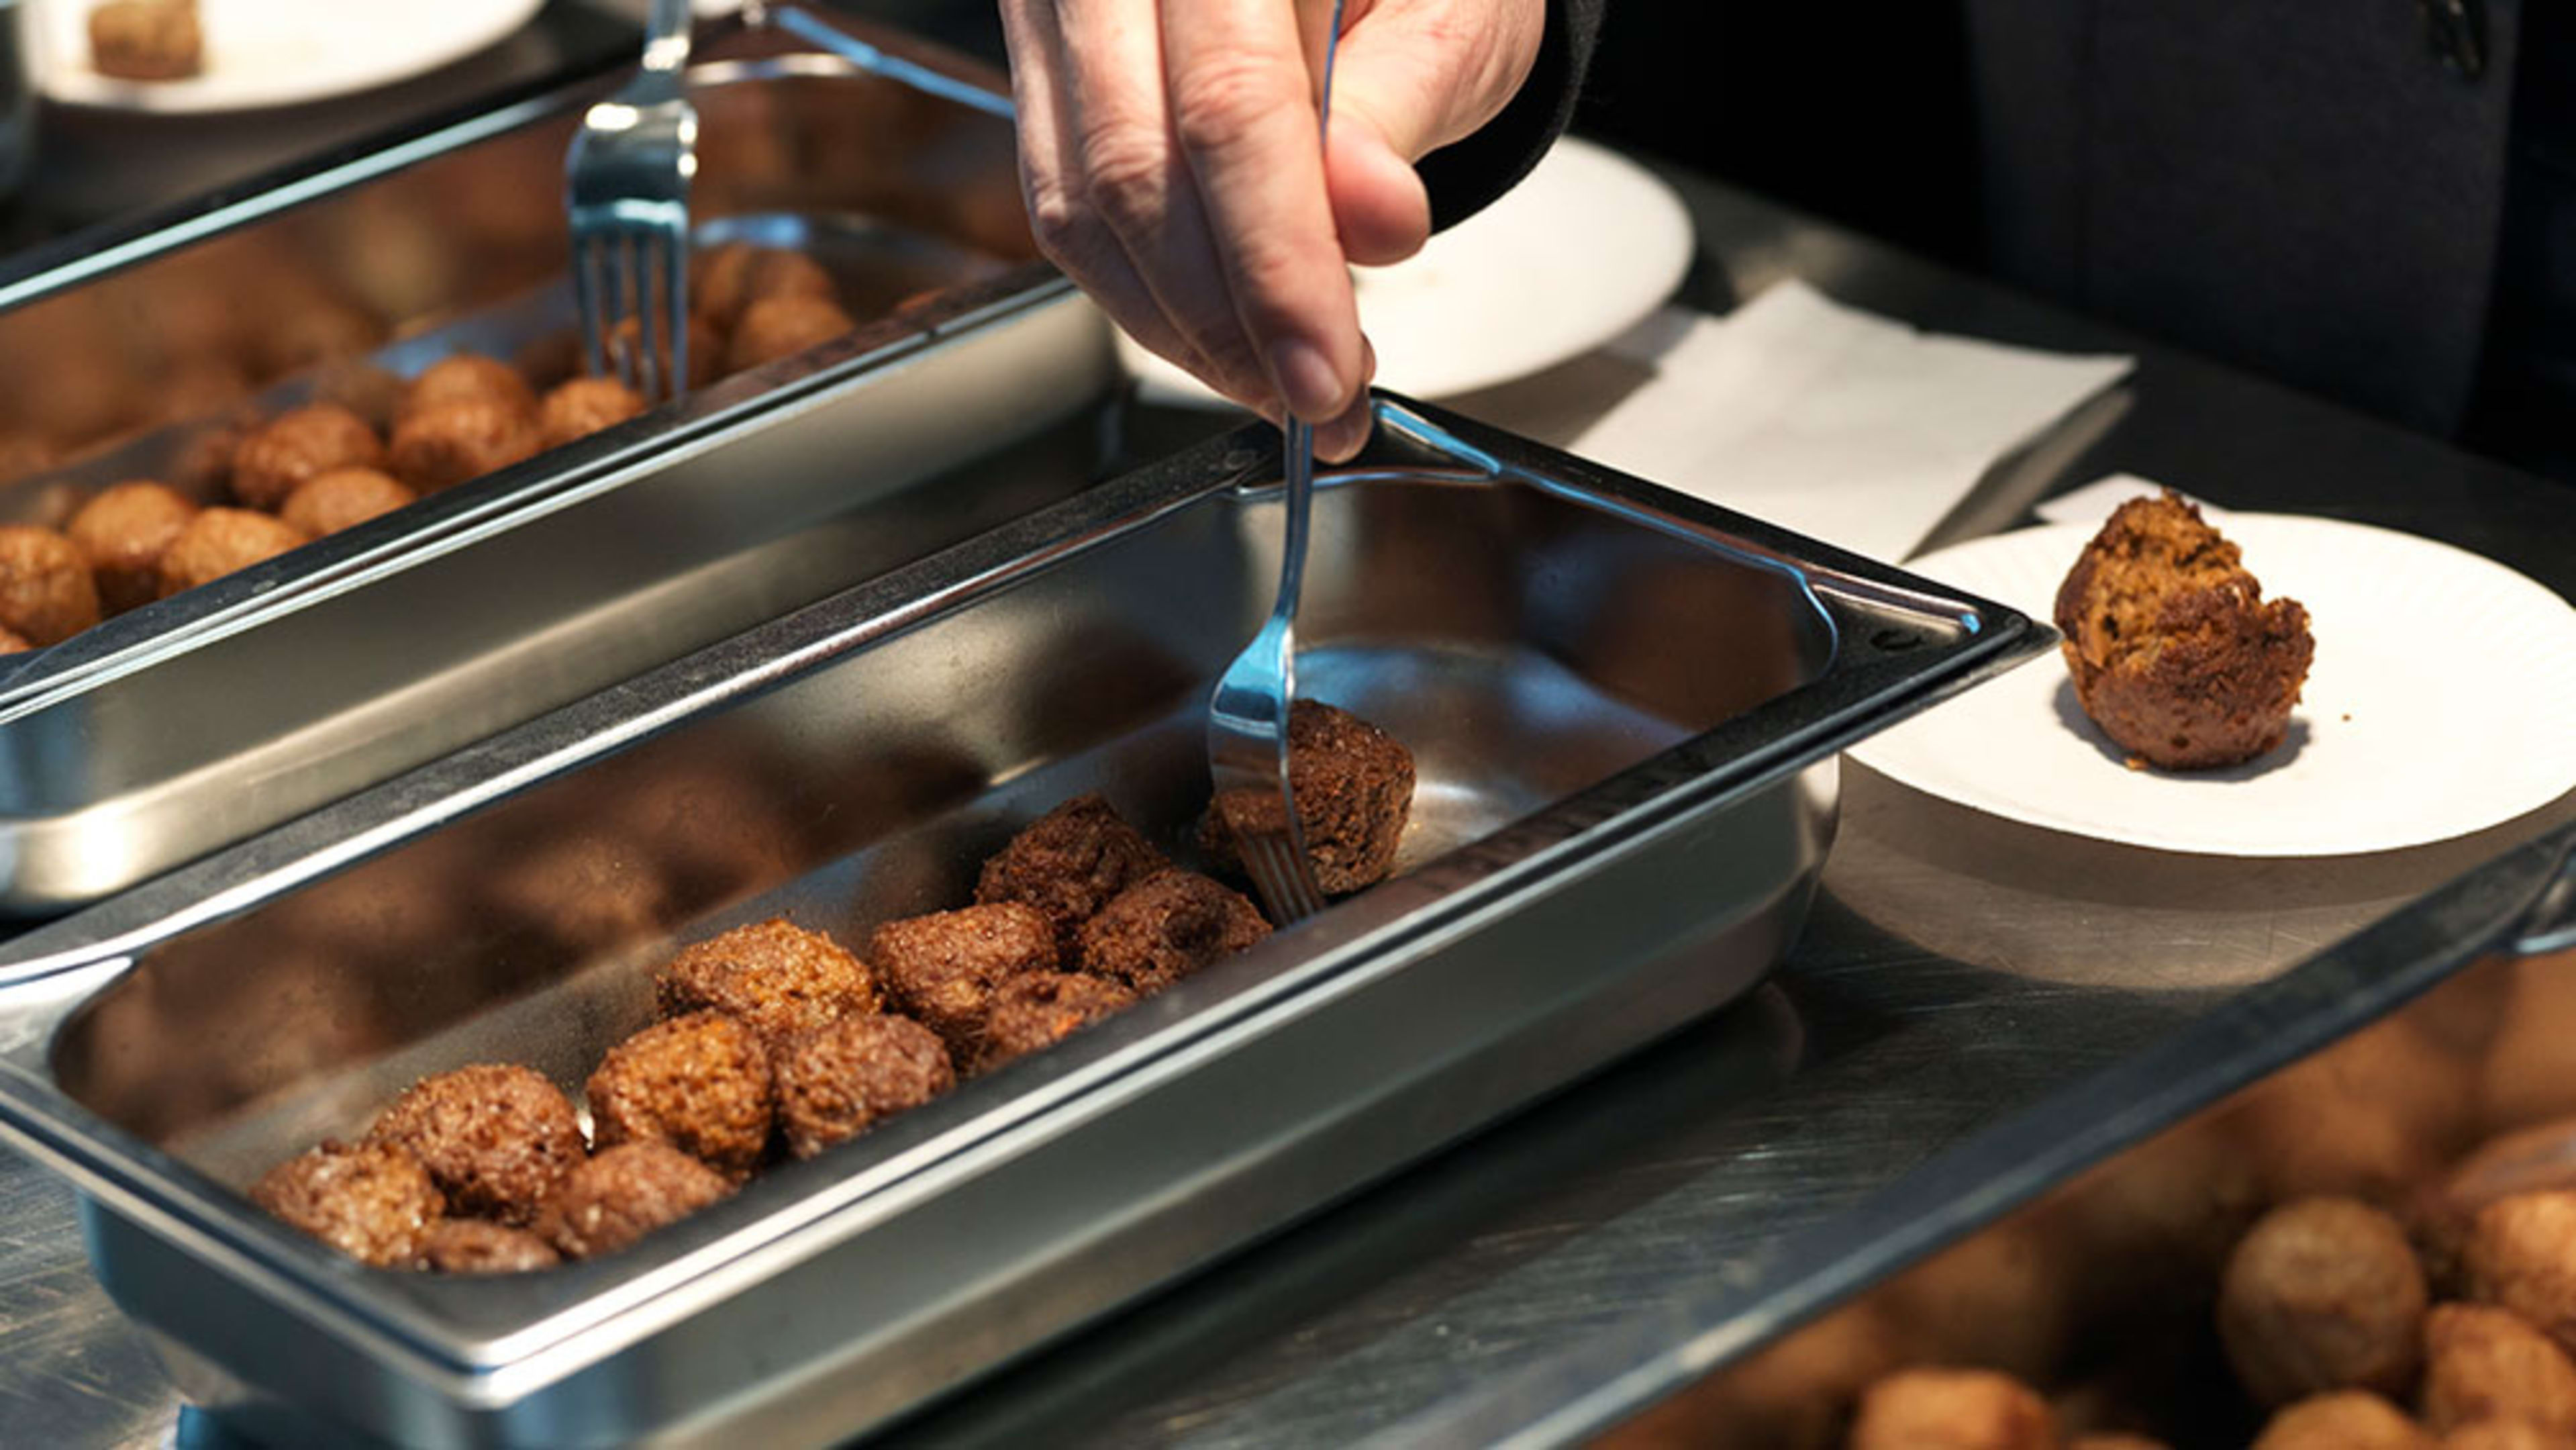 Ikea will soon have a meatless version of its iconic meatball